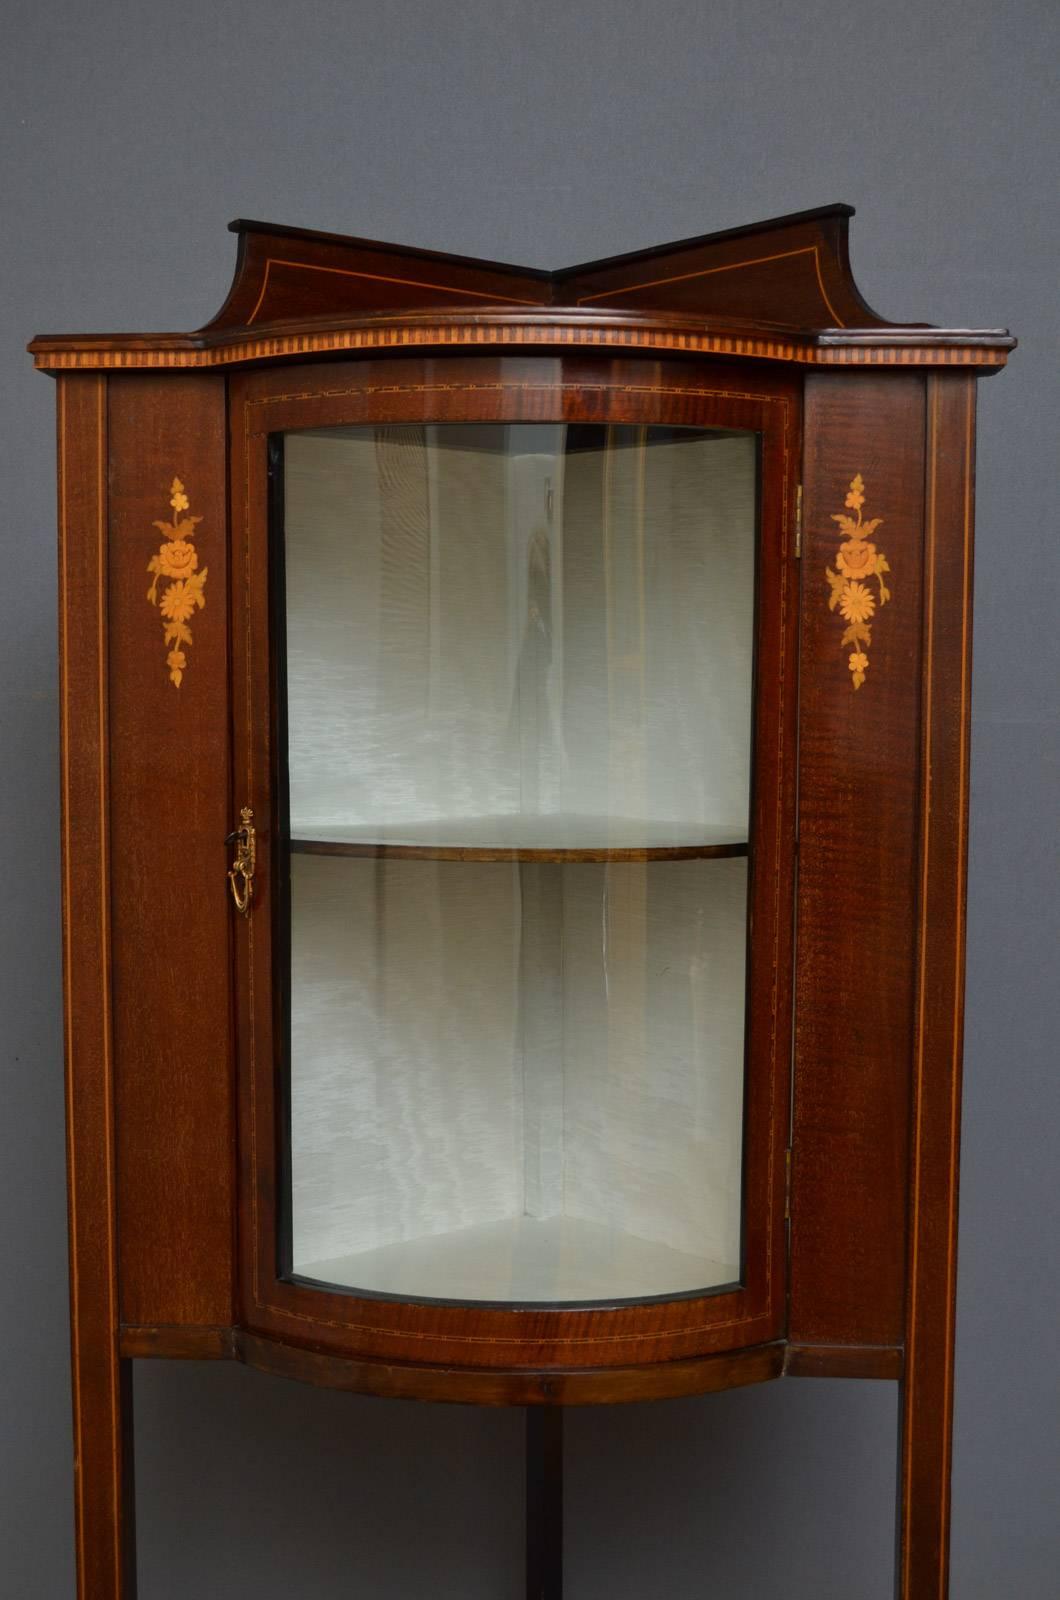 Great Britain (UK) Edwardian Matched Pair of Corner Display Cabinets